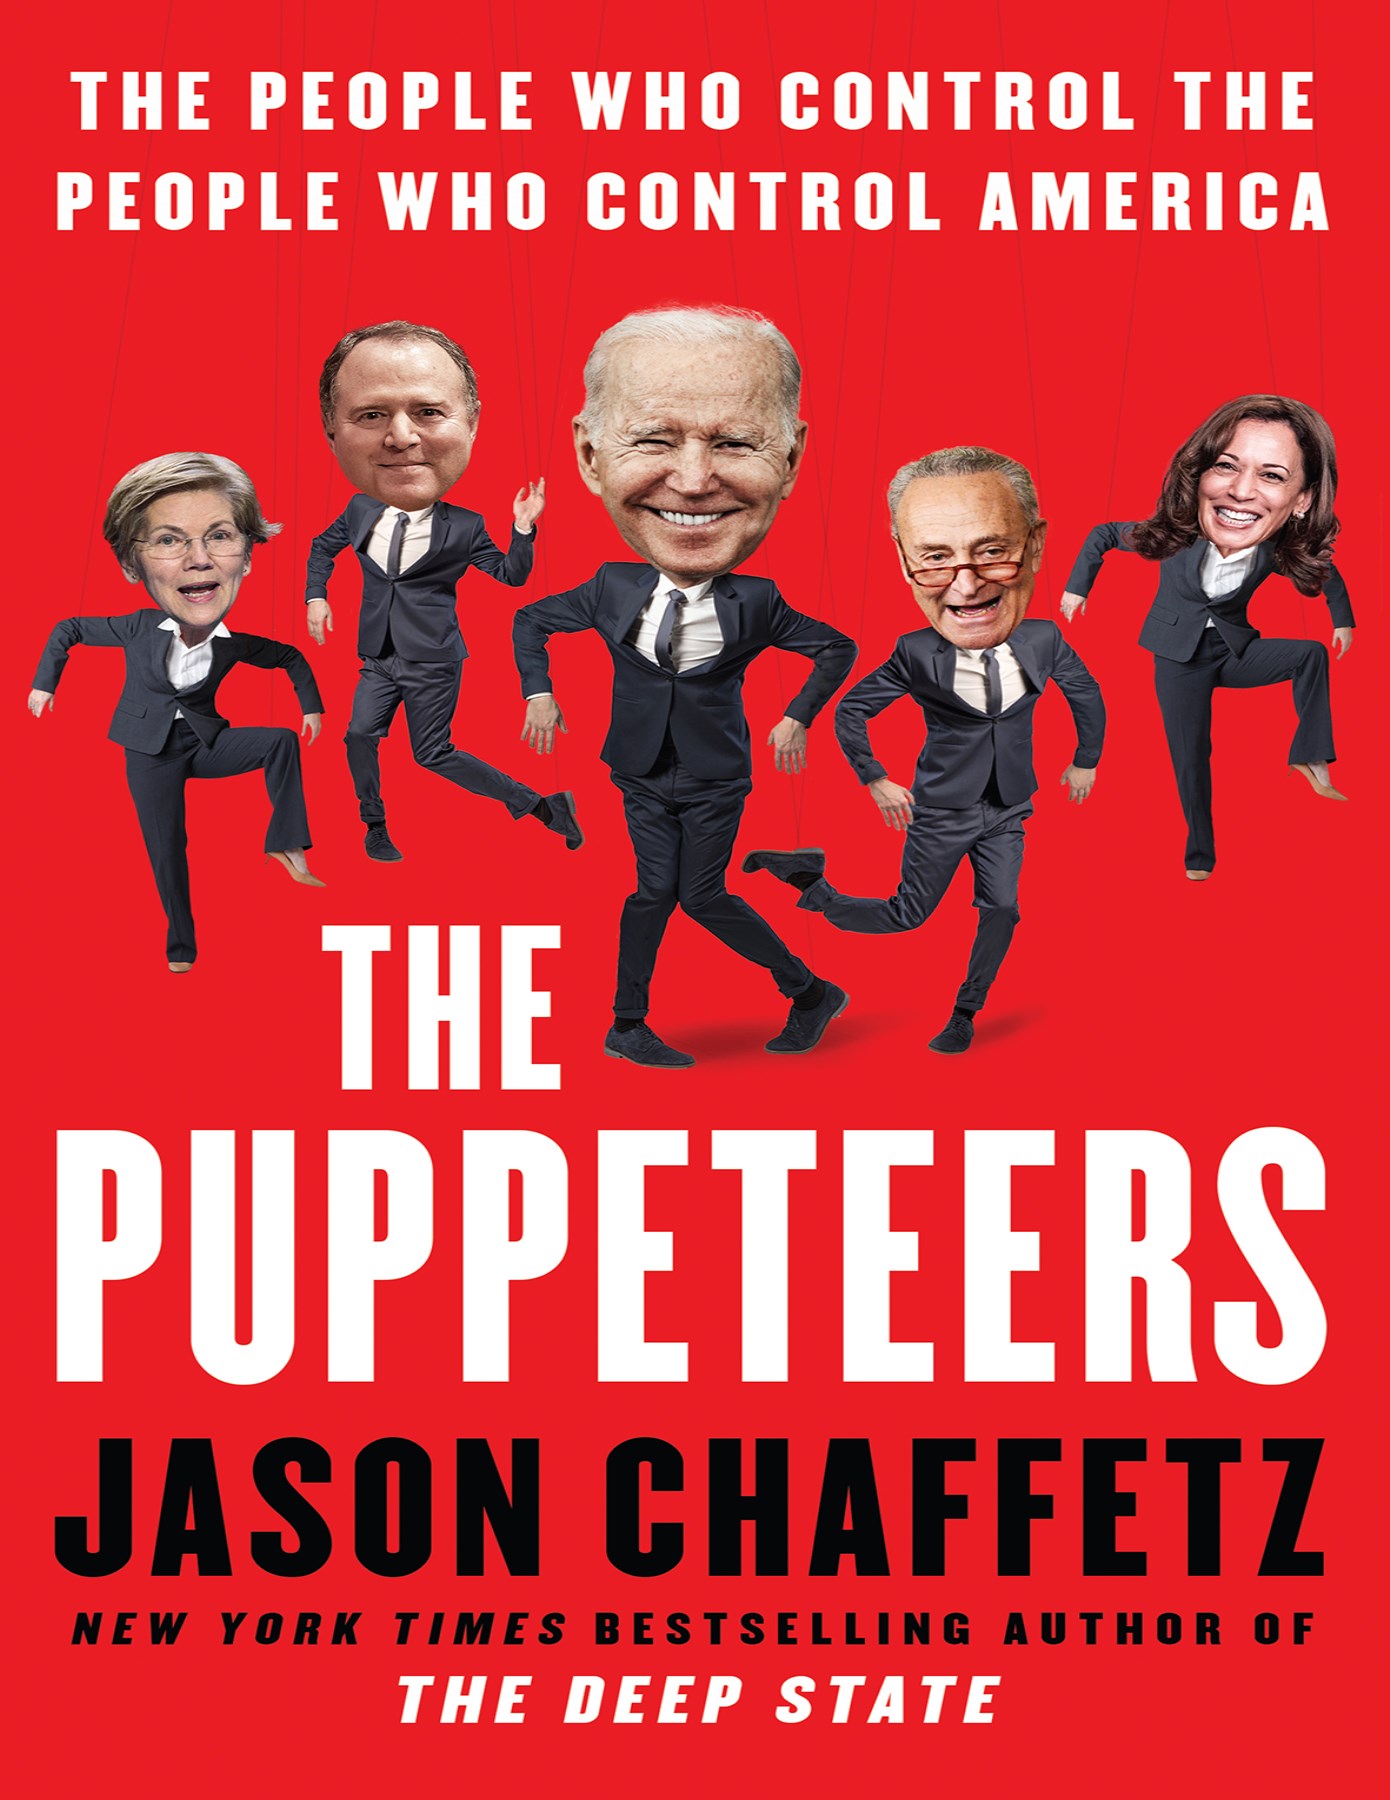 The Puppeteers People Who Control People - Jason Chaffetz